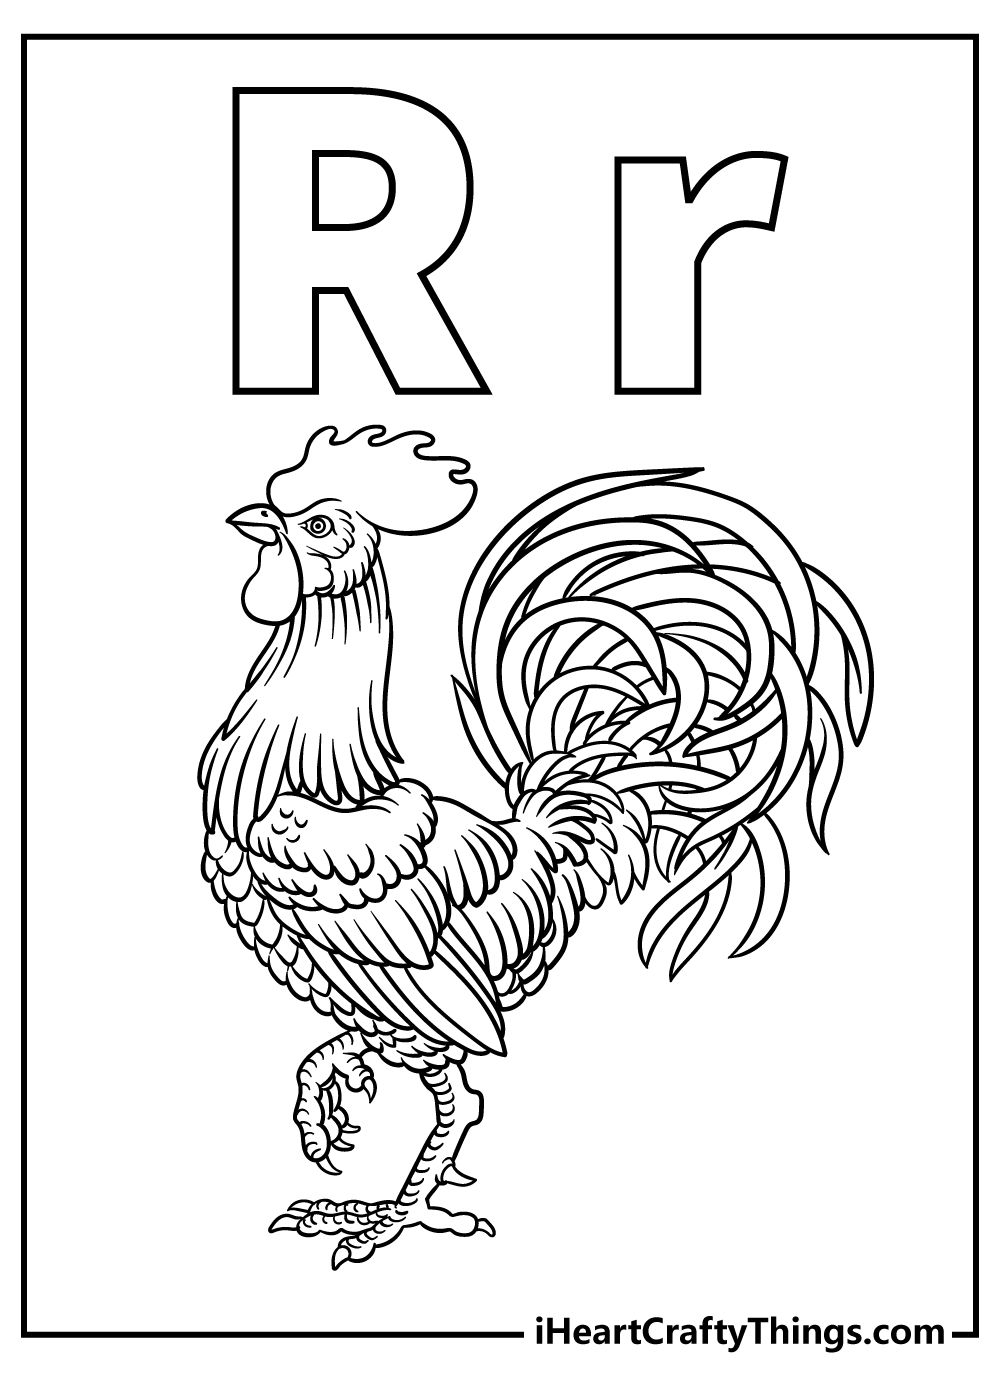 Letter R Coloring Book free printable